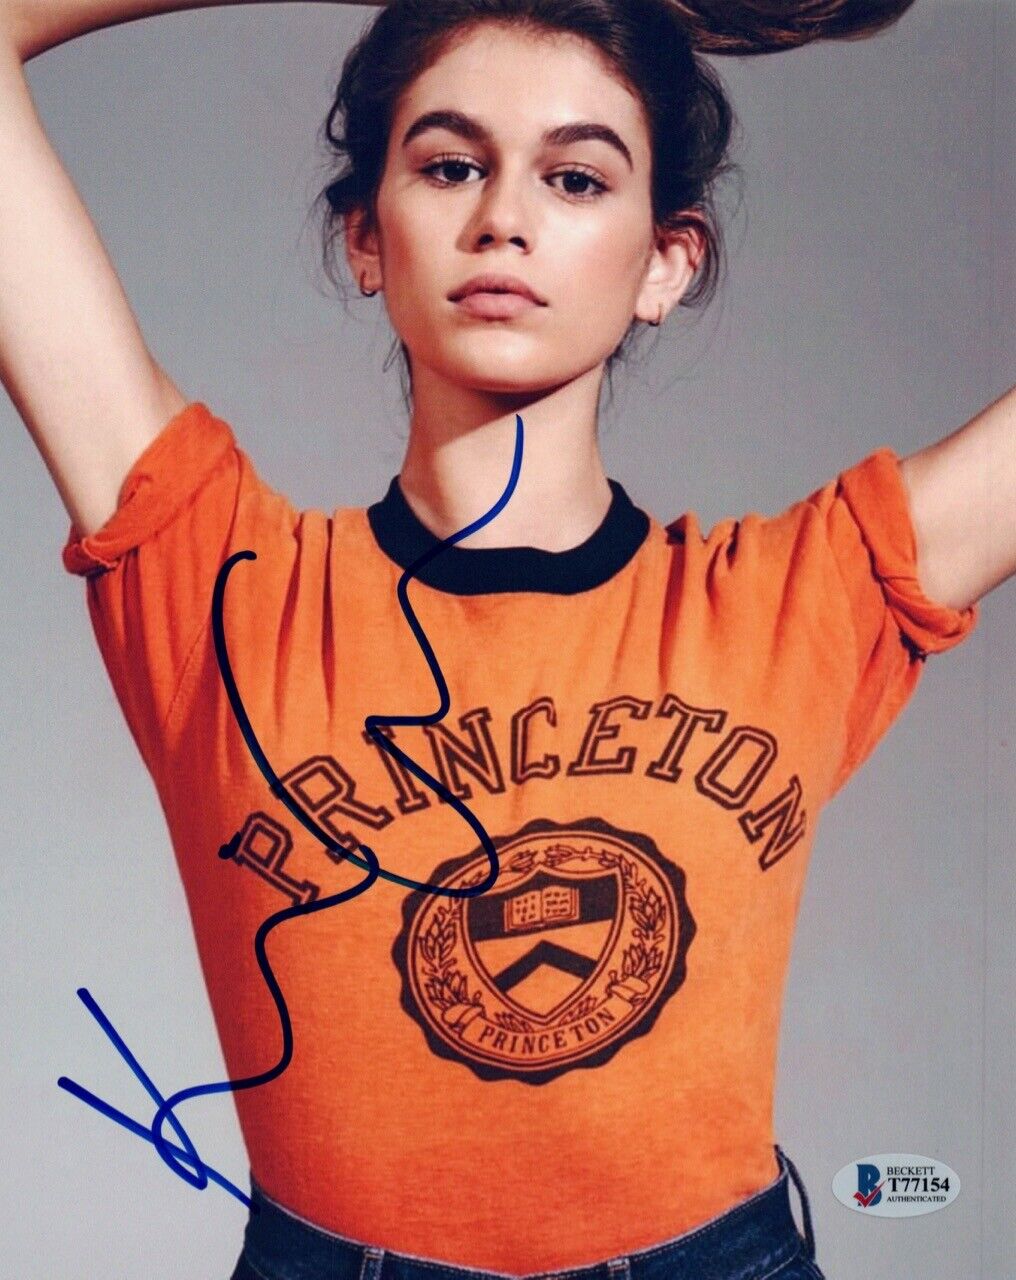 Kaia Gerber Signed Autographed 8x10 Photo Poster painting Model Beckett BAS COA